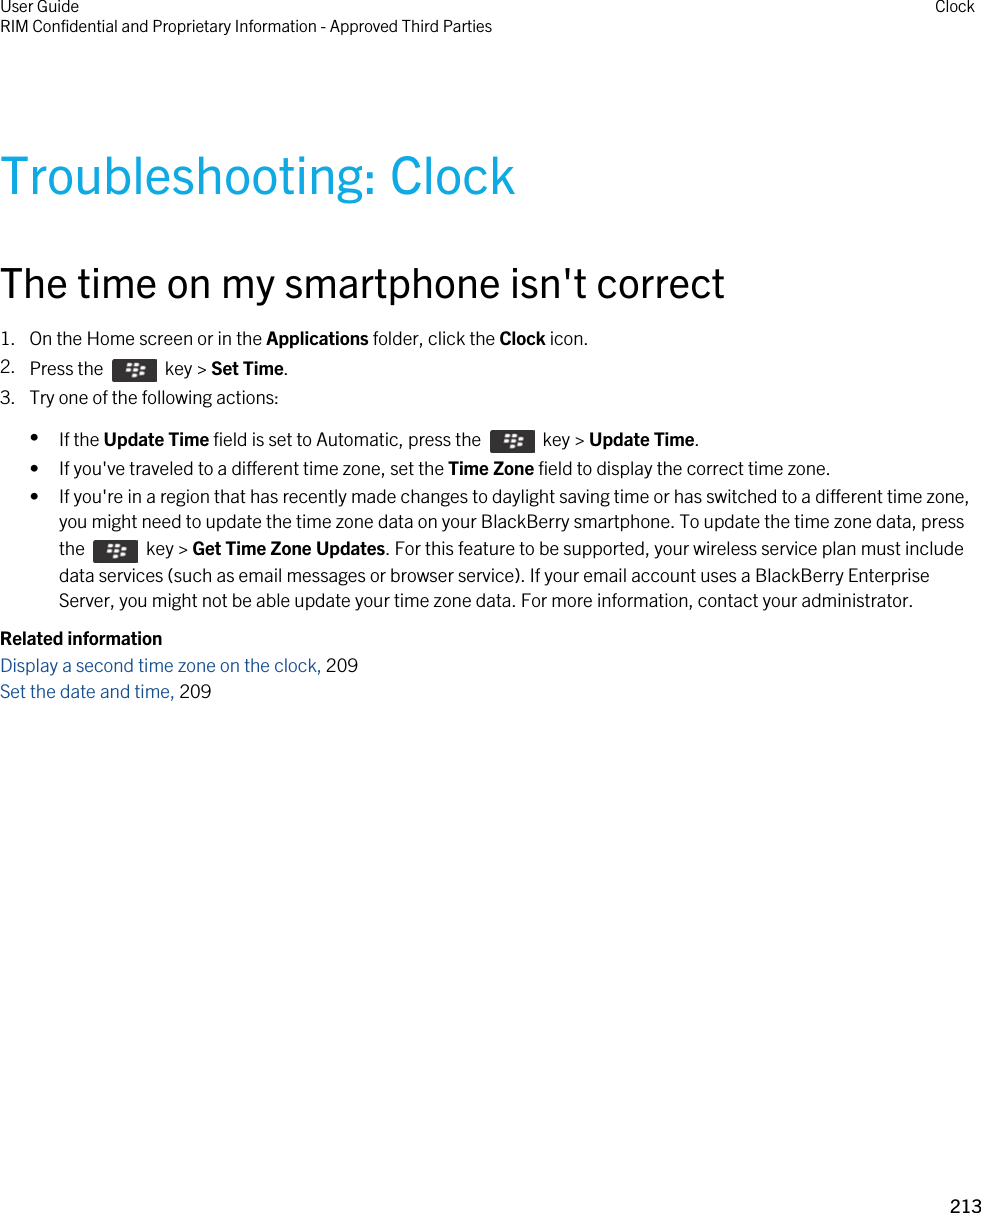 Troubleshooting: ClockThe time on my smartphone isn&apos;t correct1. On the Home screen or in the Applications folder, click the Clock icon.2. Press the    key &gt; Set Time.3. Try one of the following actions:•If the Update Time field is set to Automatic, press the    key &gt; Update Time.• If you&apos;ve traveled to a different time zone, set the Time Zone field to display the correct time zone.• If you&apos;re in a region that has recently made changes to daylight saving time or has switched to a different time zone, you might need to update the time zone data on your BlackBerry smartphone. To update the time zone data, press the    key &gt; Get Time Zone Updates. For this feature to be supported, your wireless service plan must include data services (such as email messages or browser service). If your email account uses a BlackBerry Enterprise Server, you might not be able update your time zone data. For more information, contact your administrator.Related informationDisplay a second time zone on the clock, 209 Set the date and time, 209 User GuideRIM Confidential and Proprietary Information - Approved Third Parties Clock213 